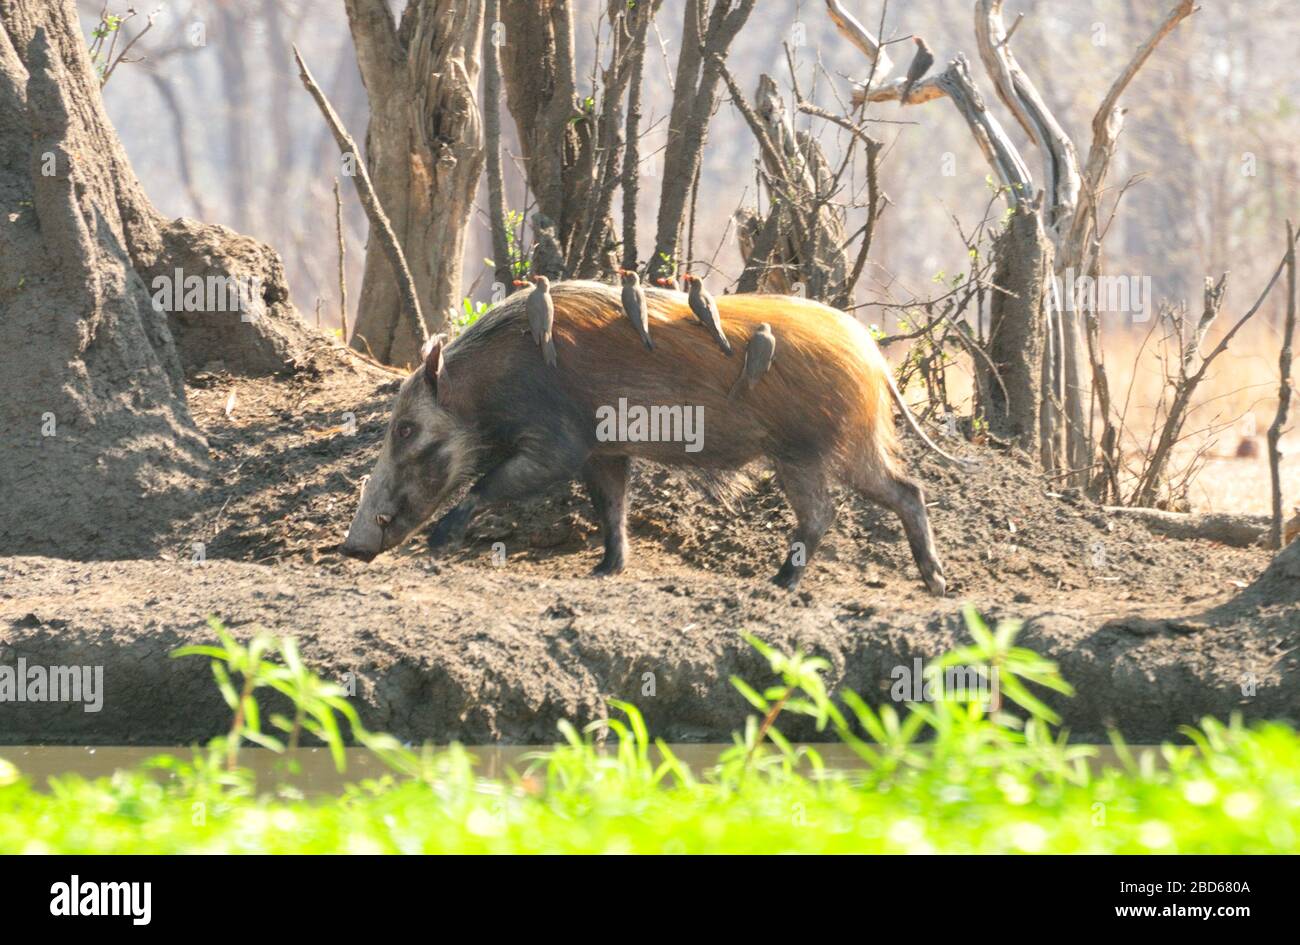 African wild bush pig (Potamochoerus larvatus) with oxpeckers at a waterhole Stock Photo